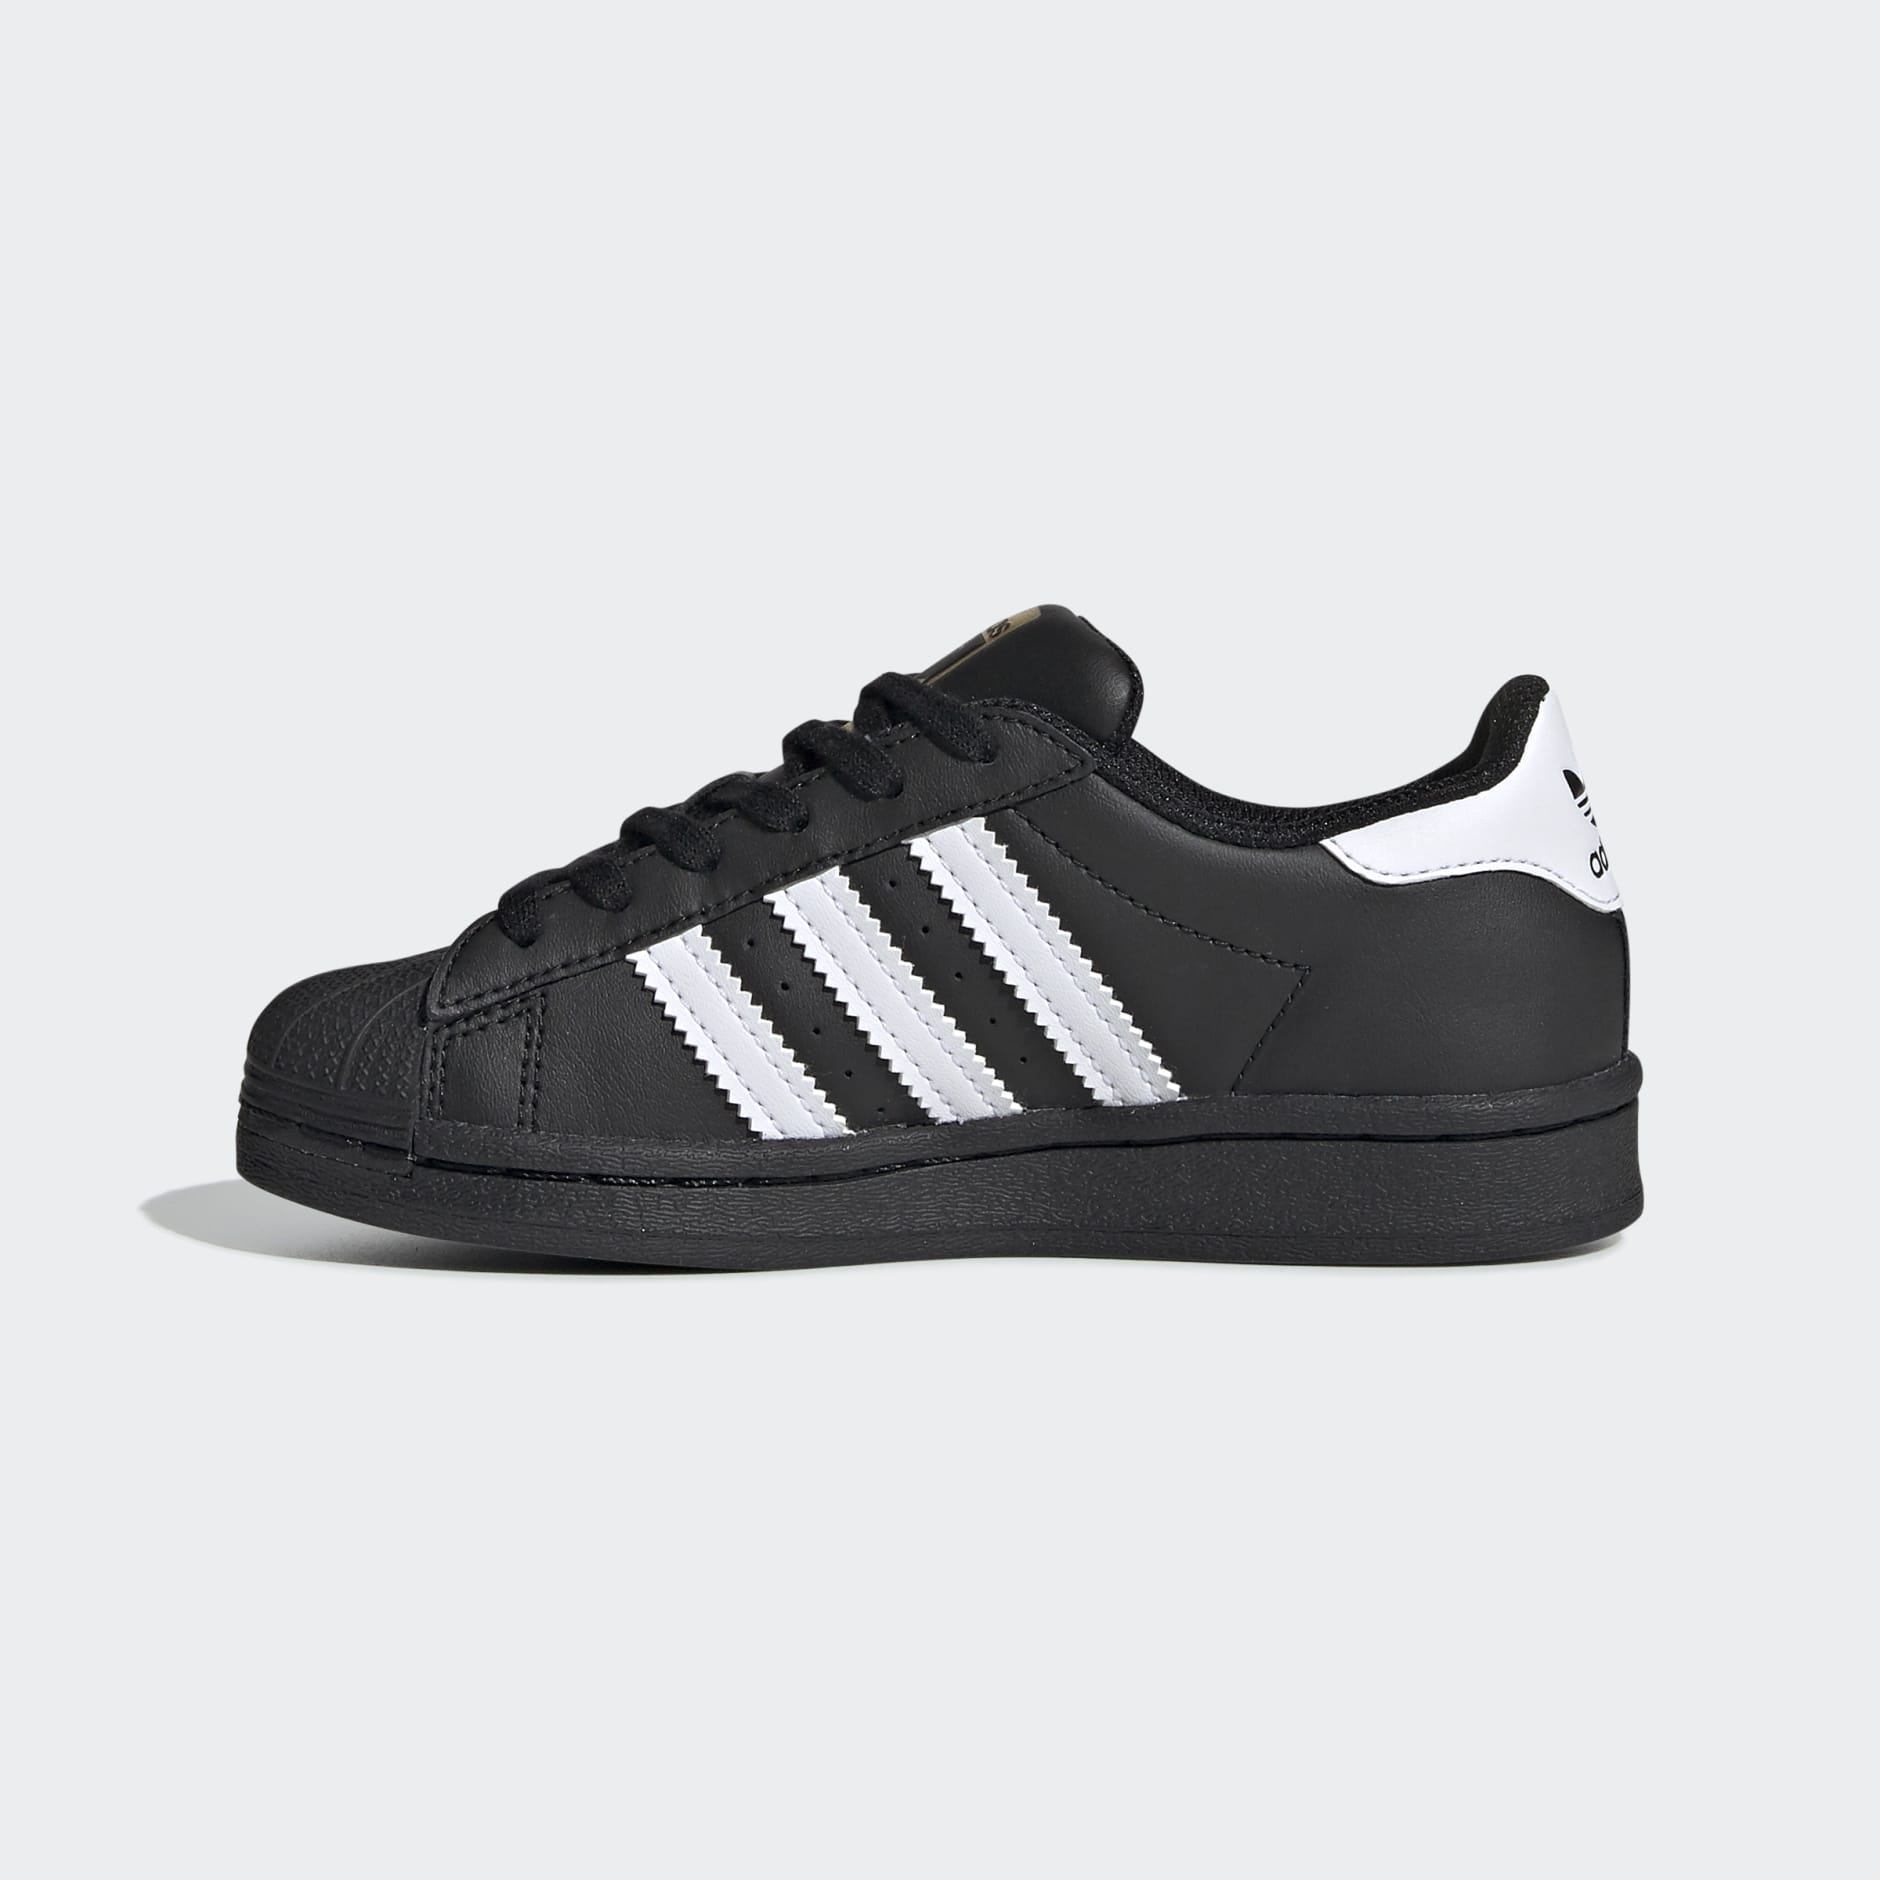 Shoes - Superstar Shoes - Black | adidas South Africa